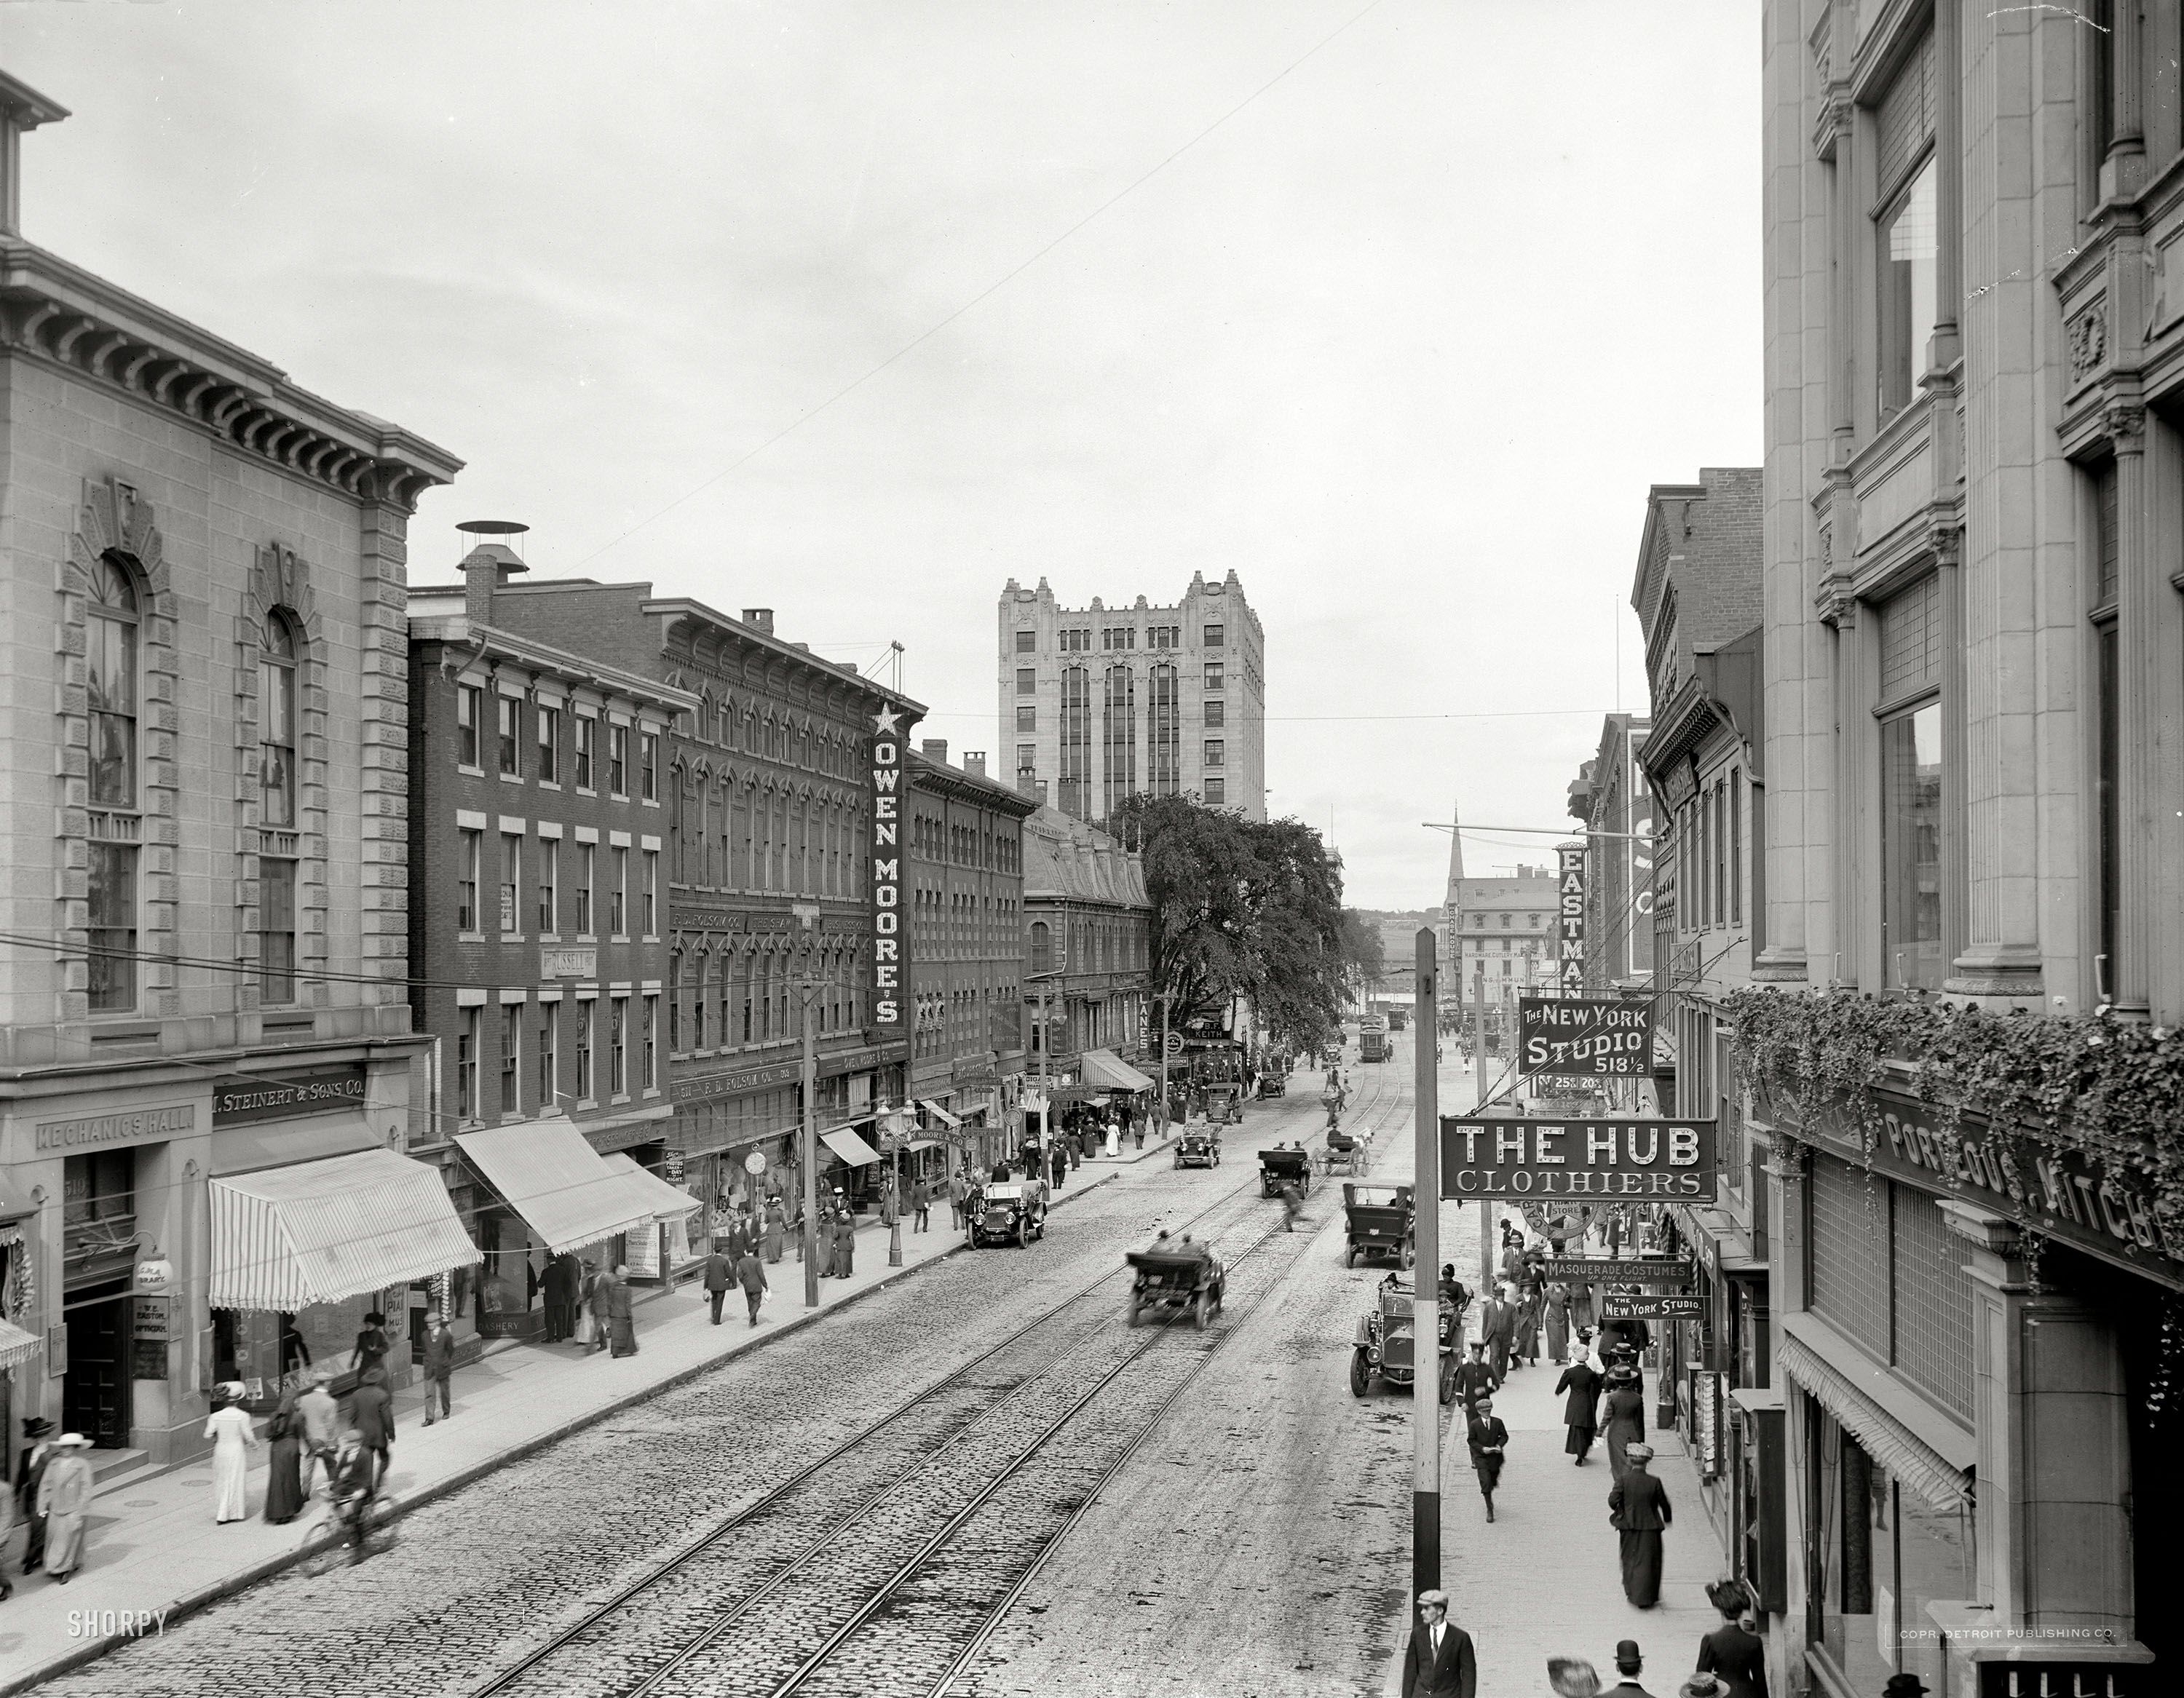 Portland, Maine, circa 1910. "Congress Street, looking north." 8x10 inch dry plate glass negative, Detroit Publishing Company. View full size.